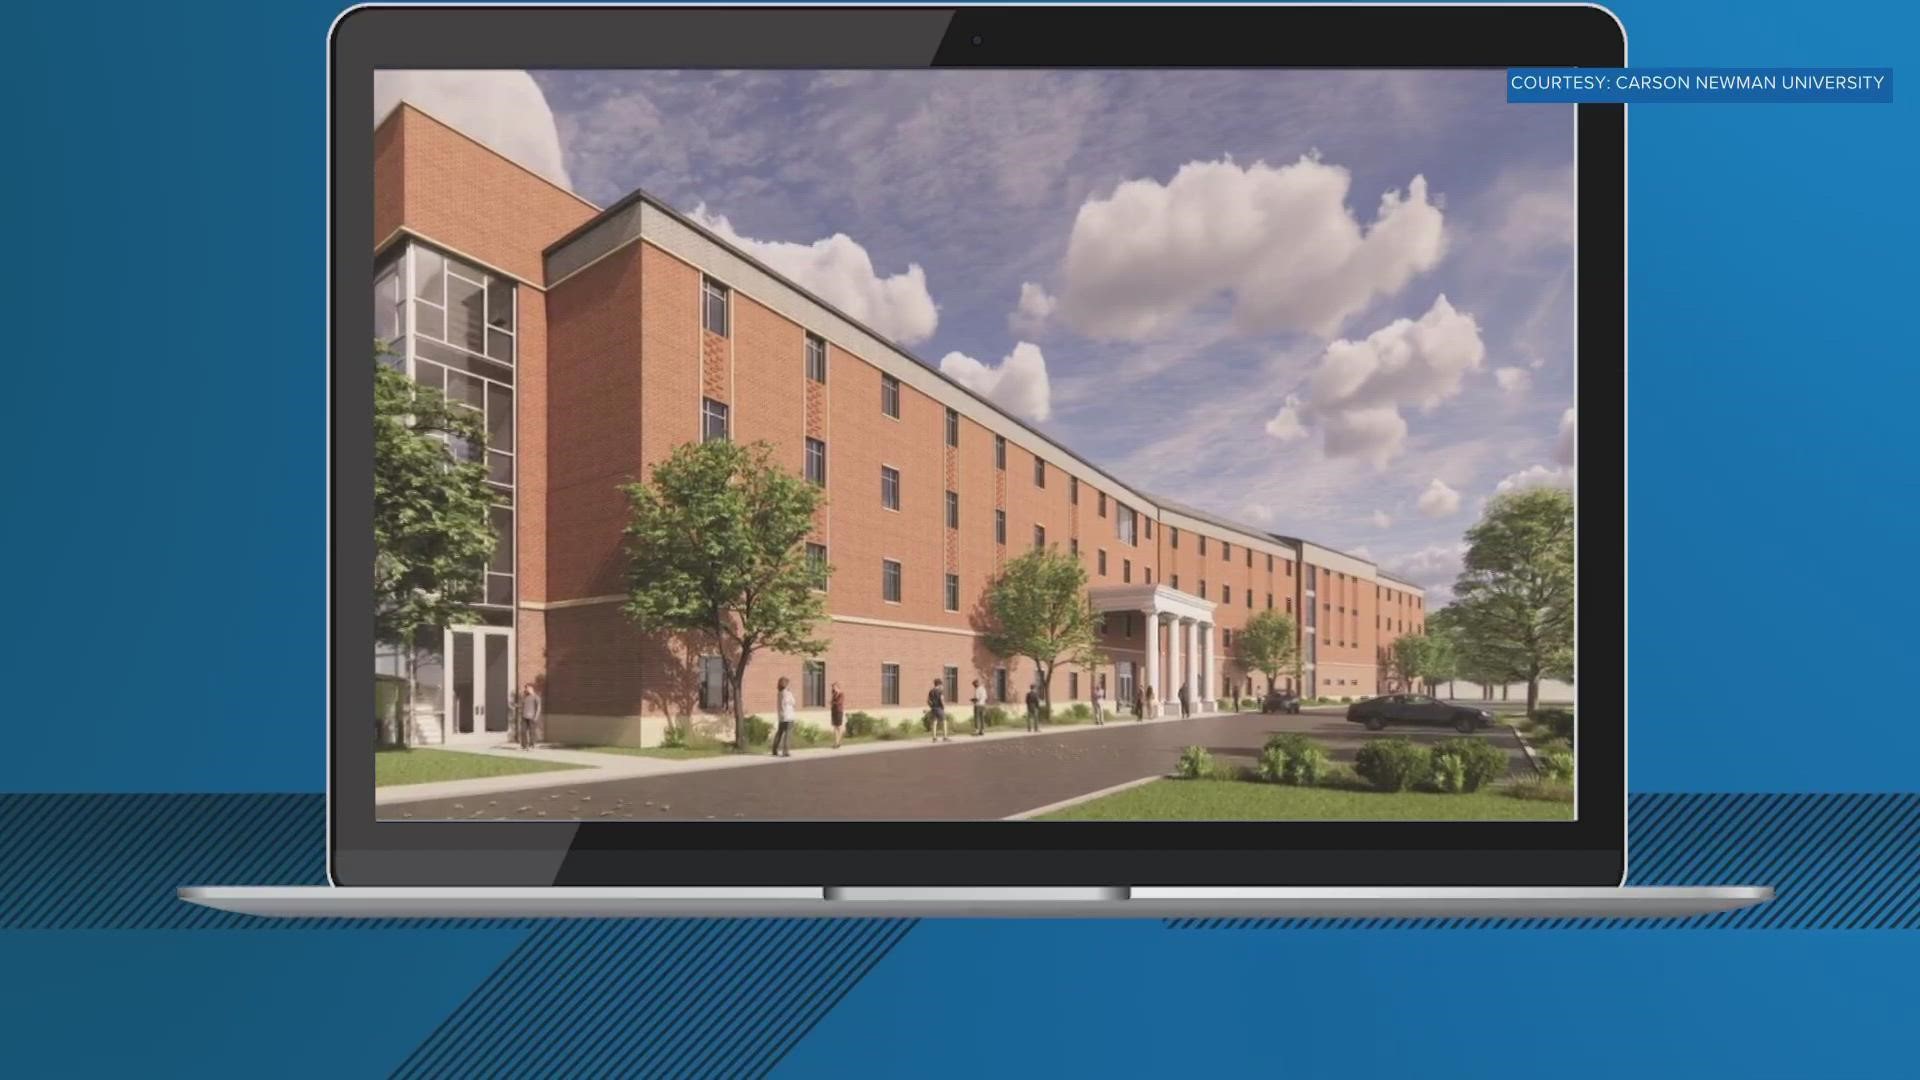 The new dorm will be the largest construction project in Carson-Newman’s 172-year history.